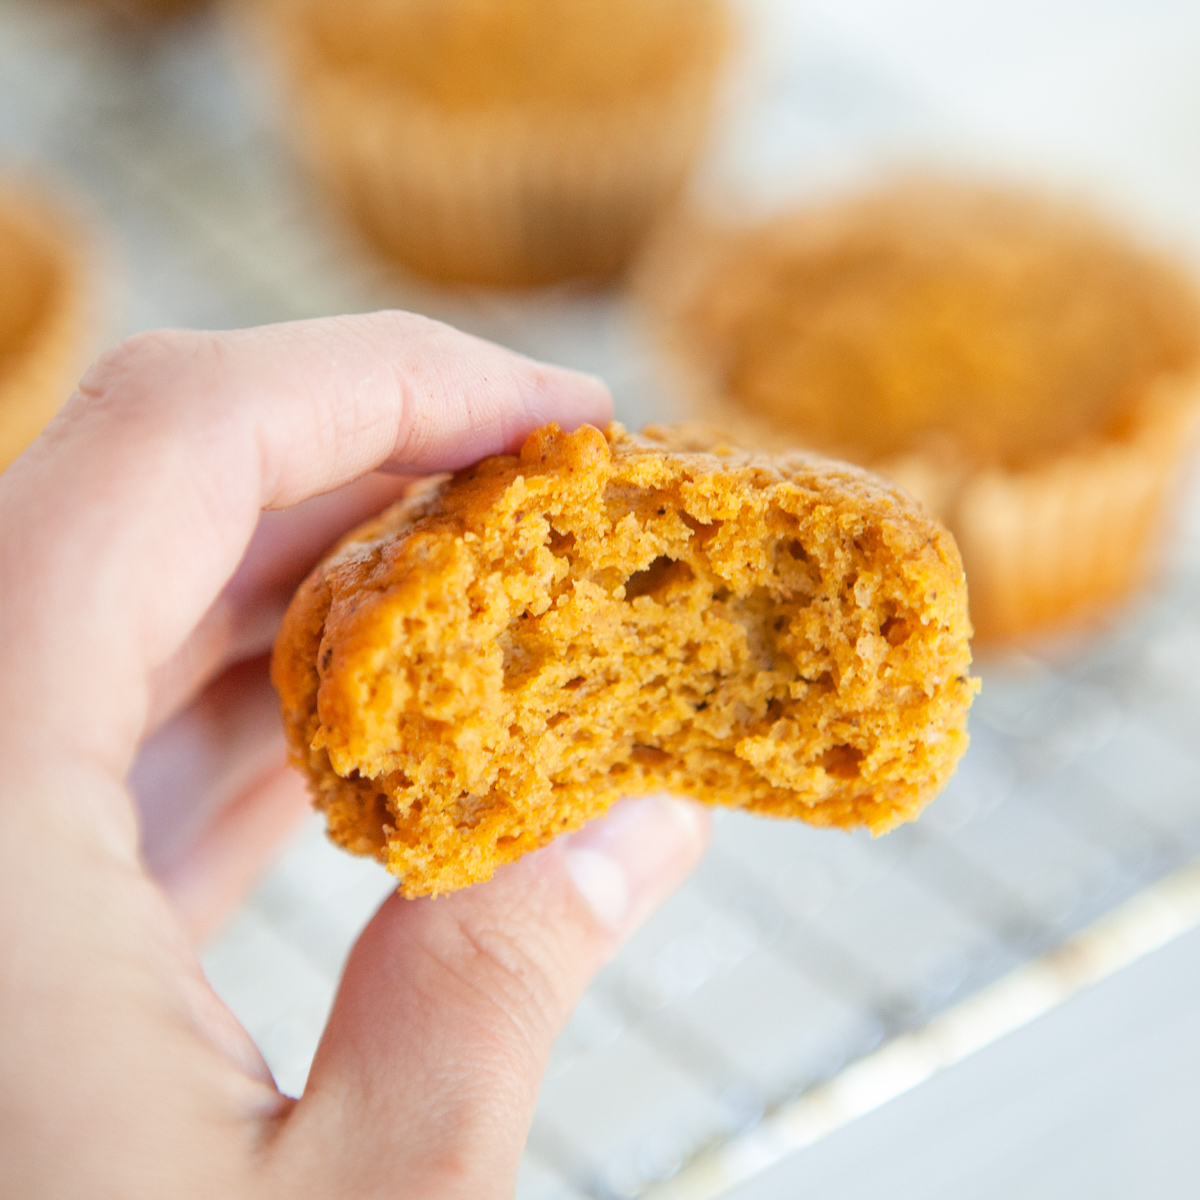 showing the texture of the inside of a pumpkin spice muffin made from 2 ingredients